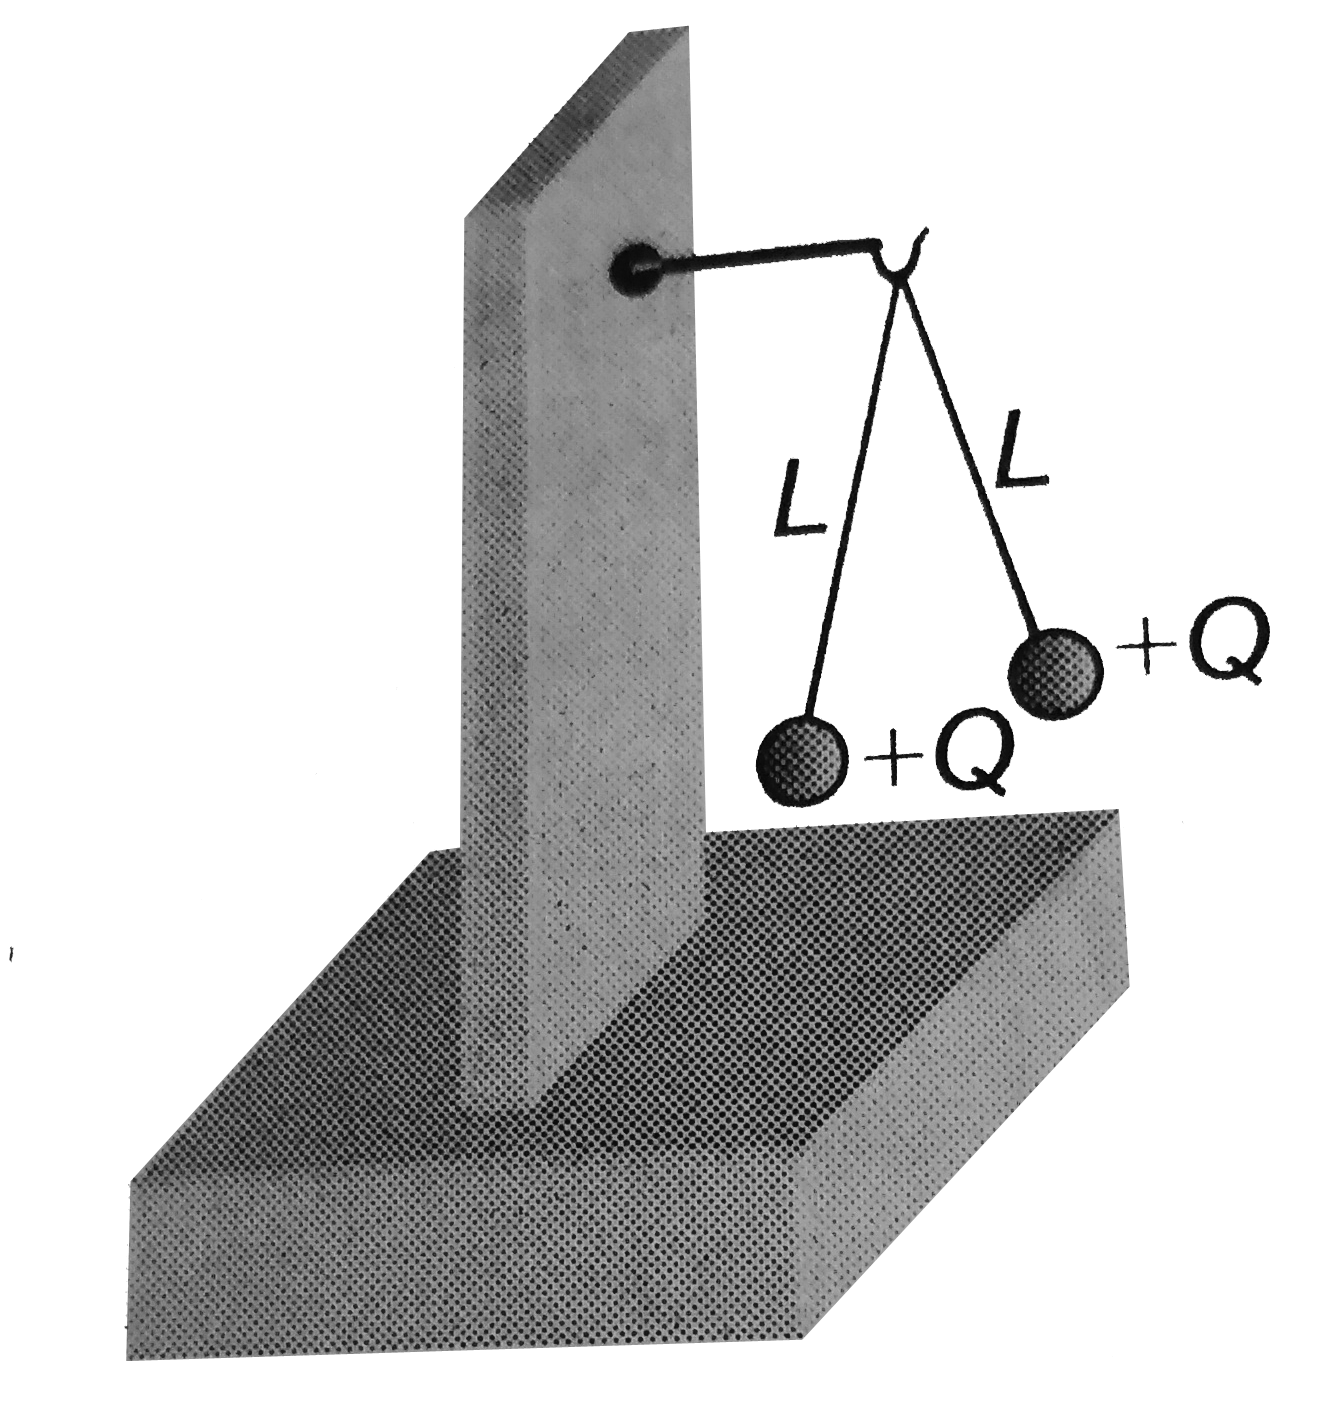 Two small balls having equal positive charge Q(coulomb) on each are suspended by two insulated string of equal length L meter, from a hook fixed to a stand. The whole gravity (state of weightlessness). Then the angle between the string and tension in the string is